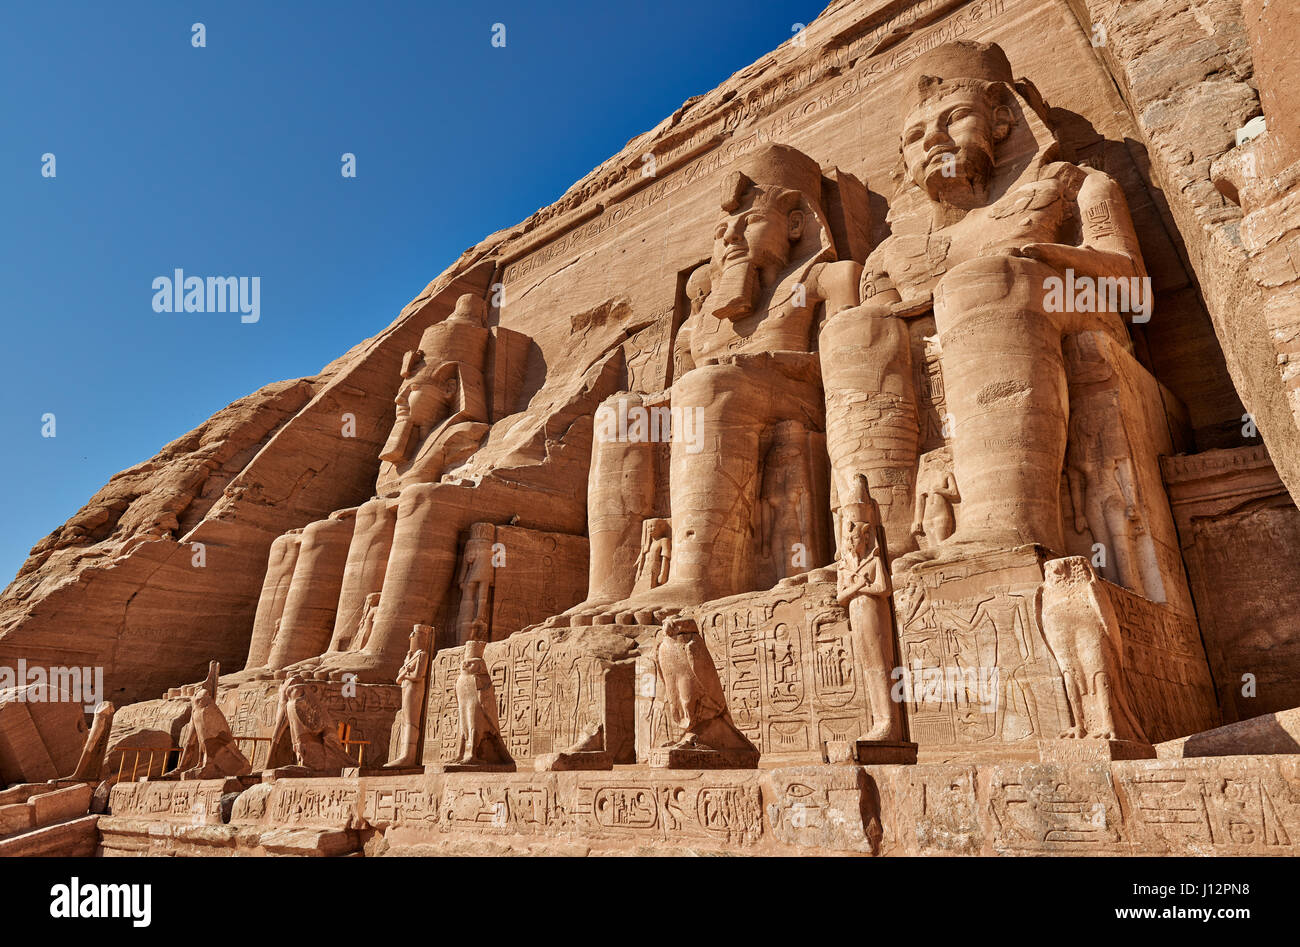 Great Temple of Ramesses II, Abu Simbel temples, Egypt, Africa Stock Photo